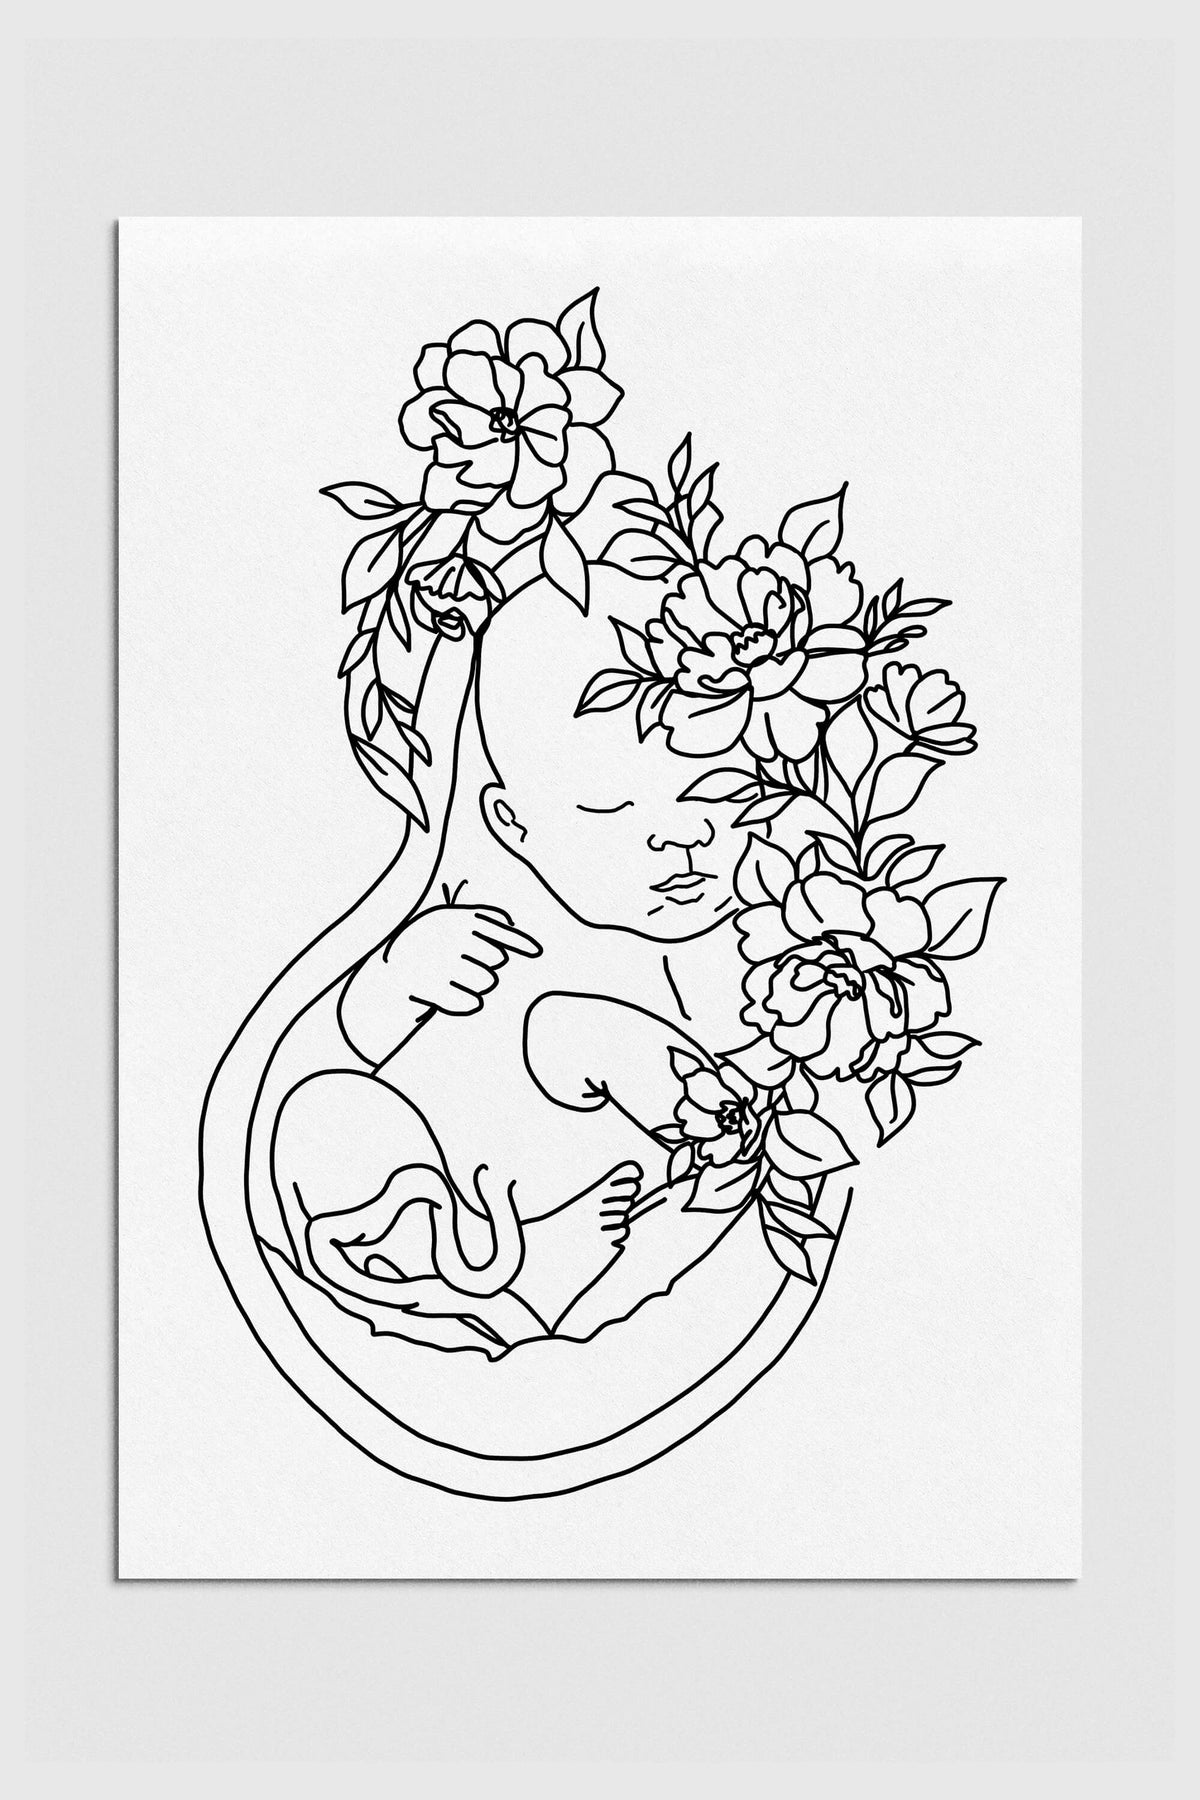 Black and white line art print depicting a floral uterus, perfect for pregnancy announcements. Delicate lines and intricate details celebrate the beauty of fertility and new beginnings.